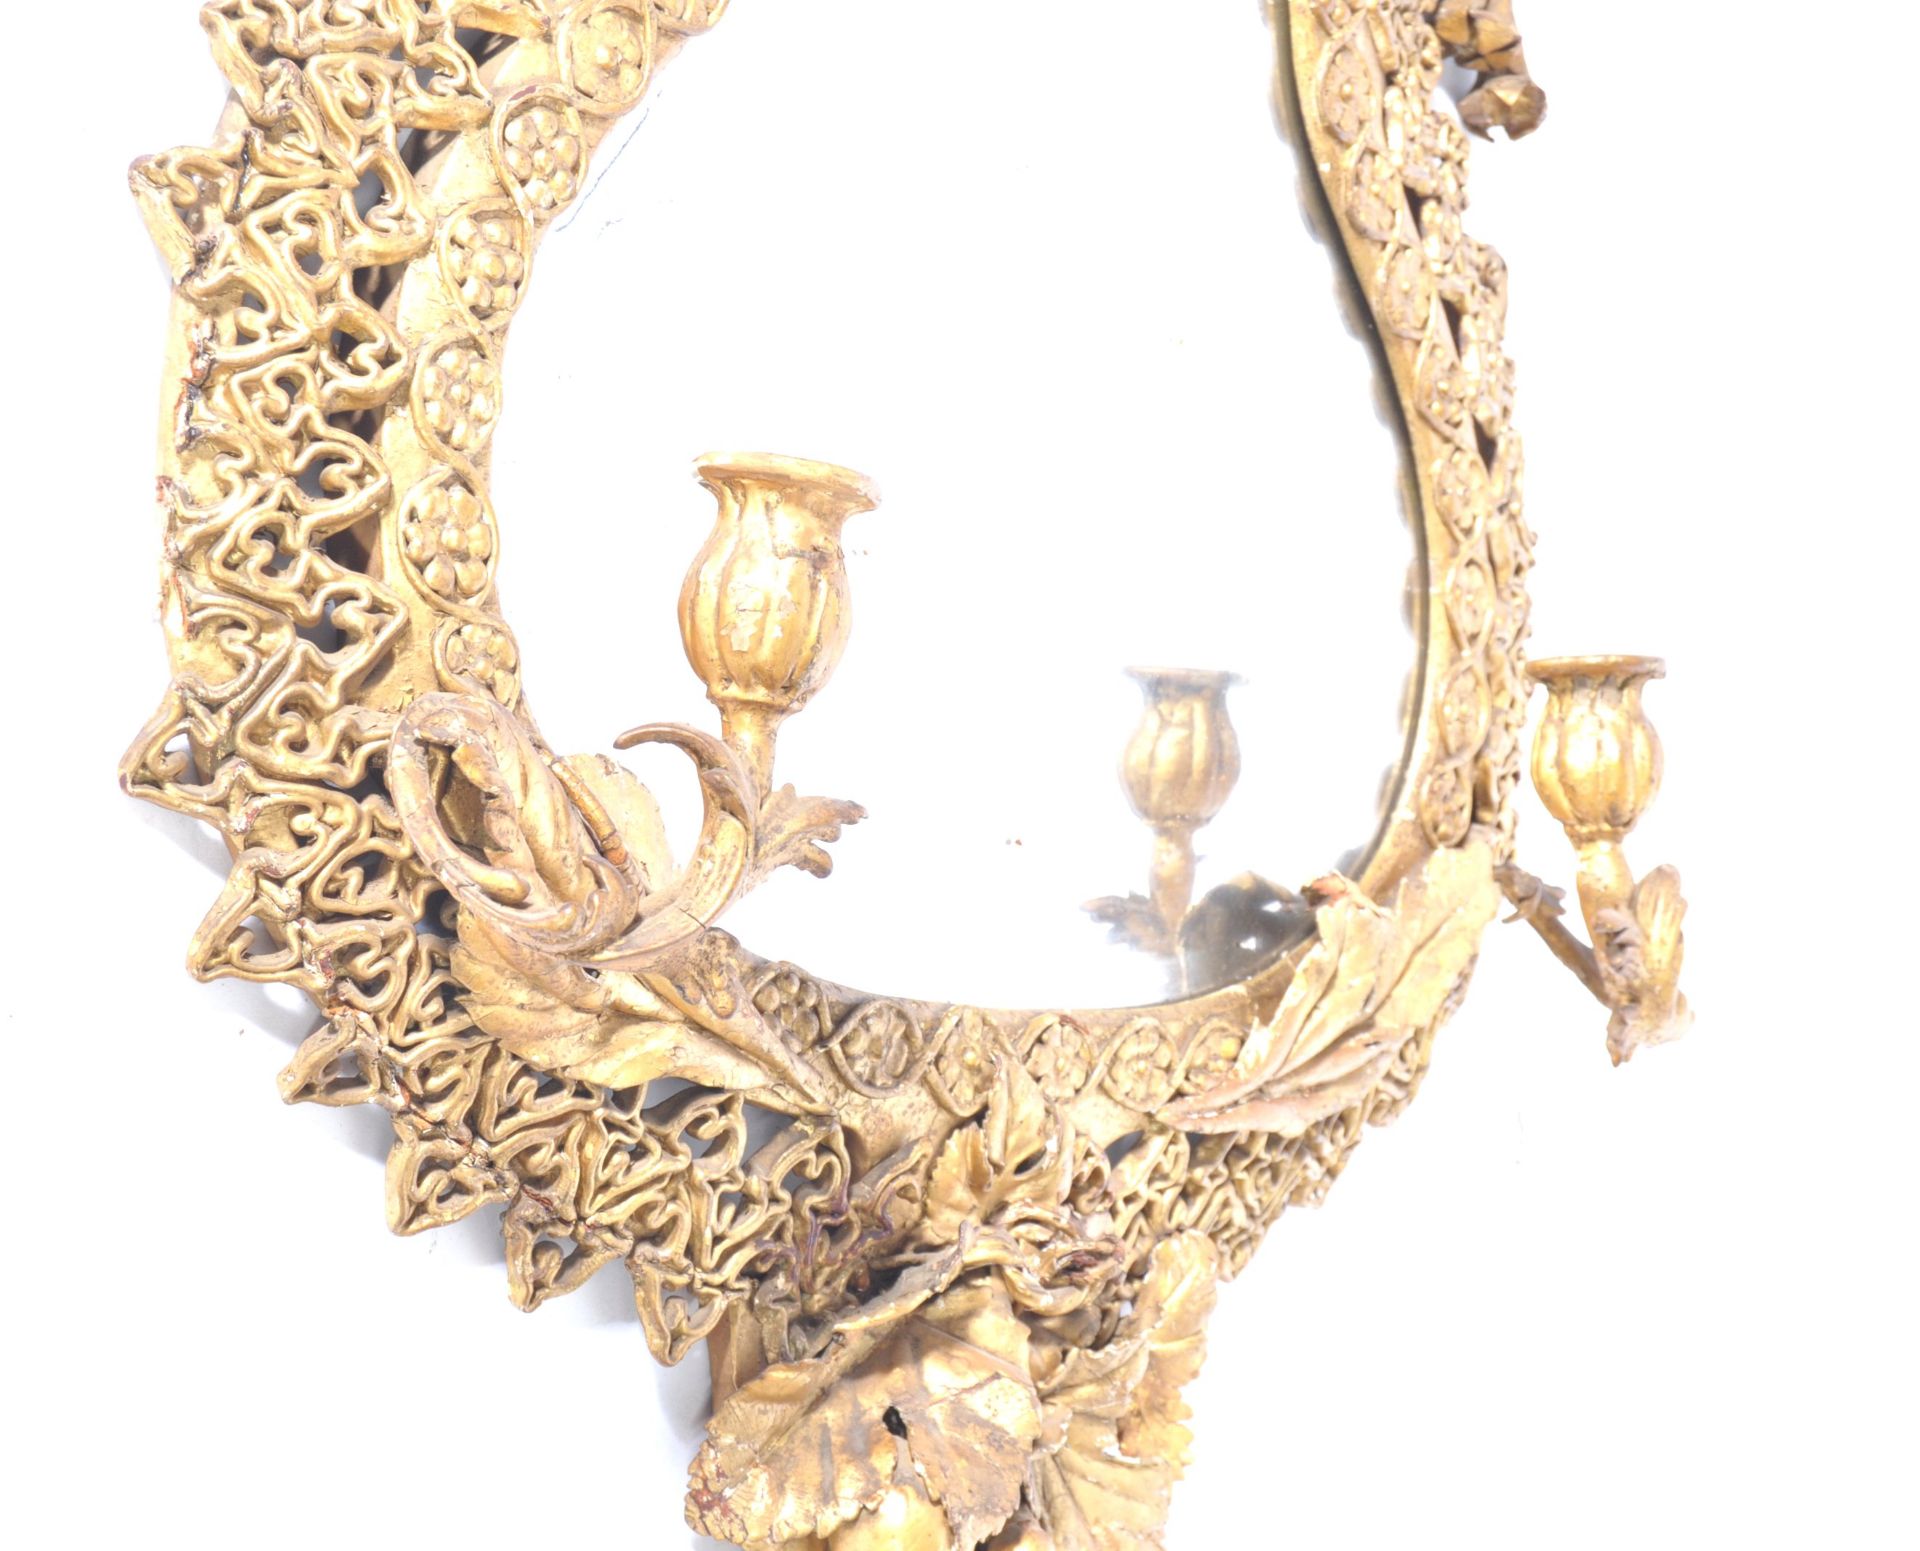 ANTIQUE LEATHER GILDED WALL MIRROR WITH TWIN CANDLE SCONCES. - Image 2 of 5